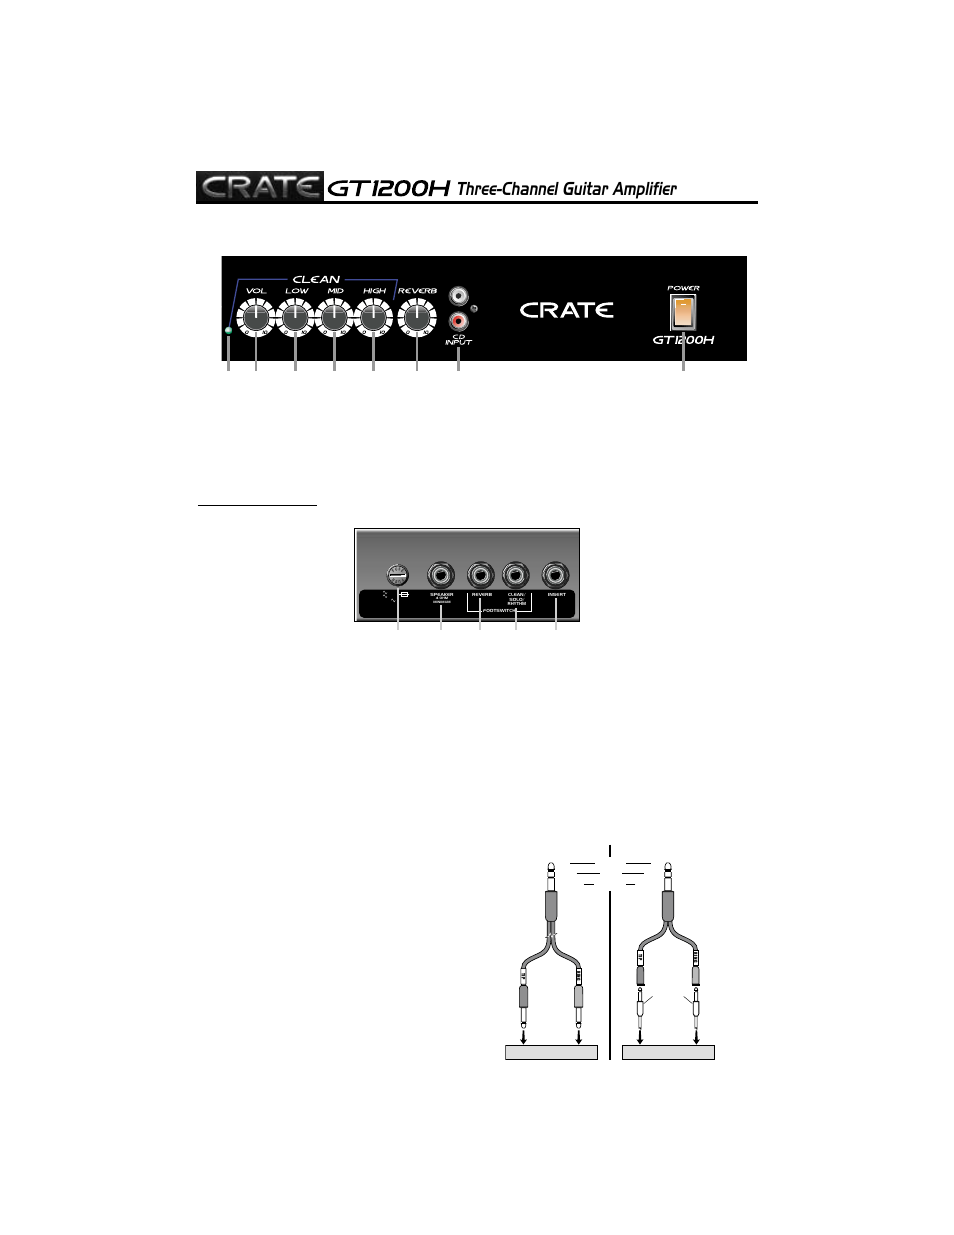 Three-channel guitar amplifier, The rear panel | Crate Amplifiers gt1200h  User Manual | Page 5 / 12